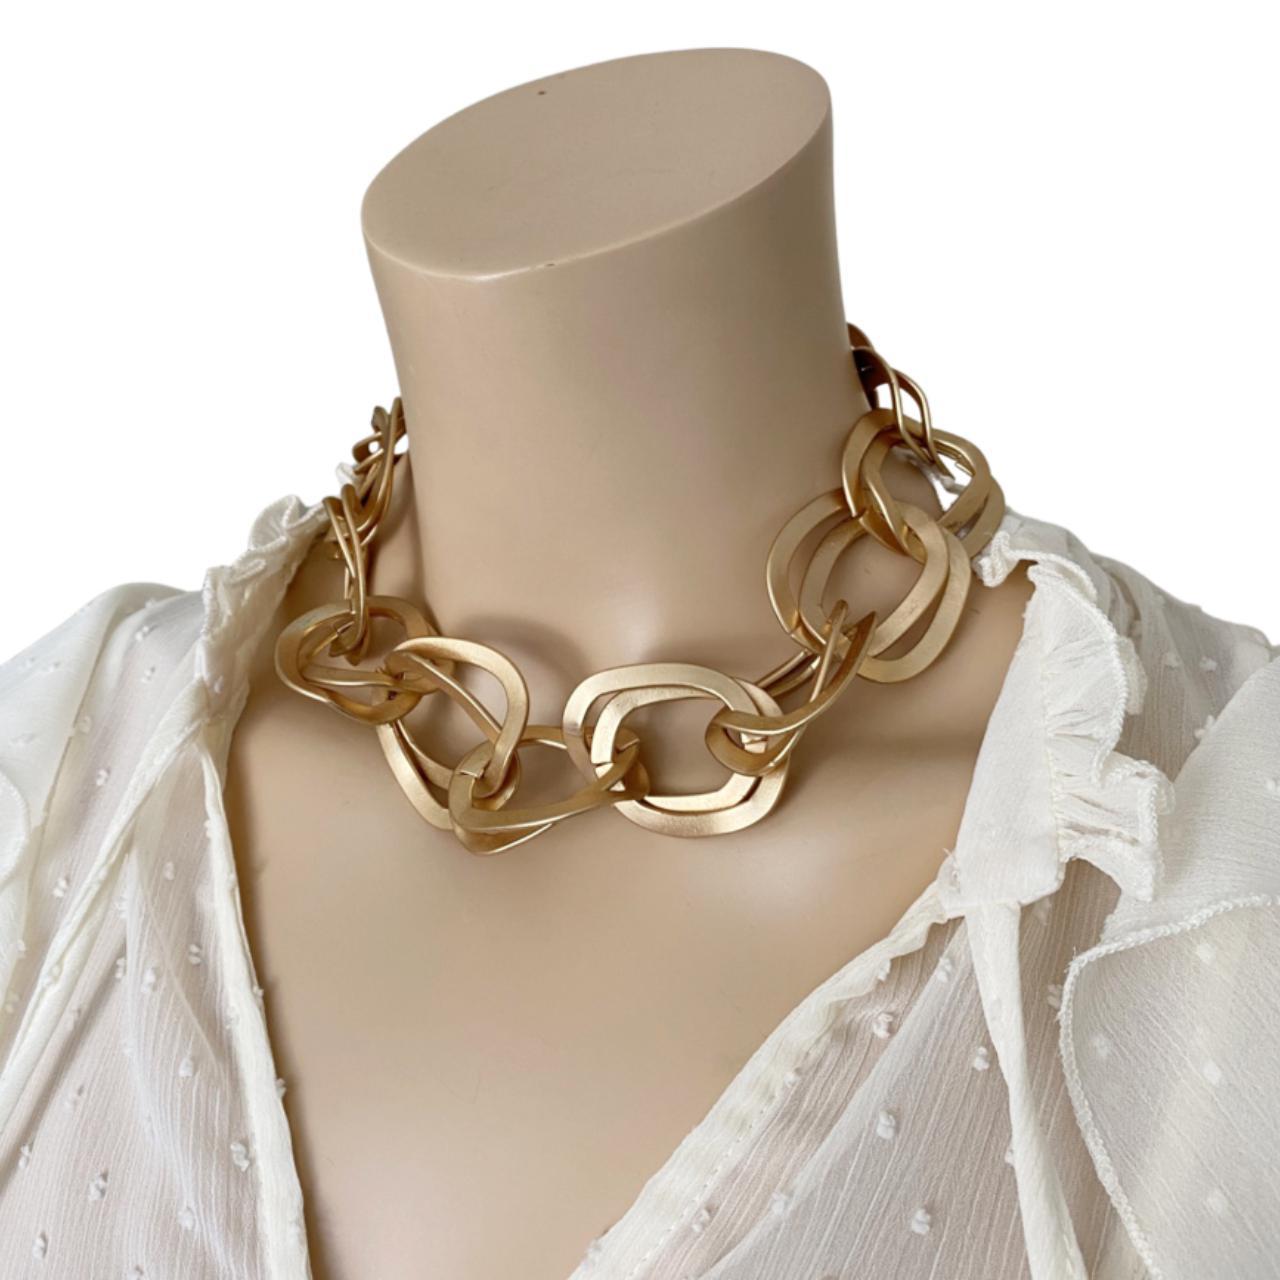 Product Image 1 - New

Chunky double chain link choker